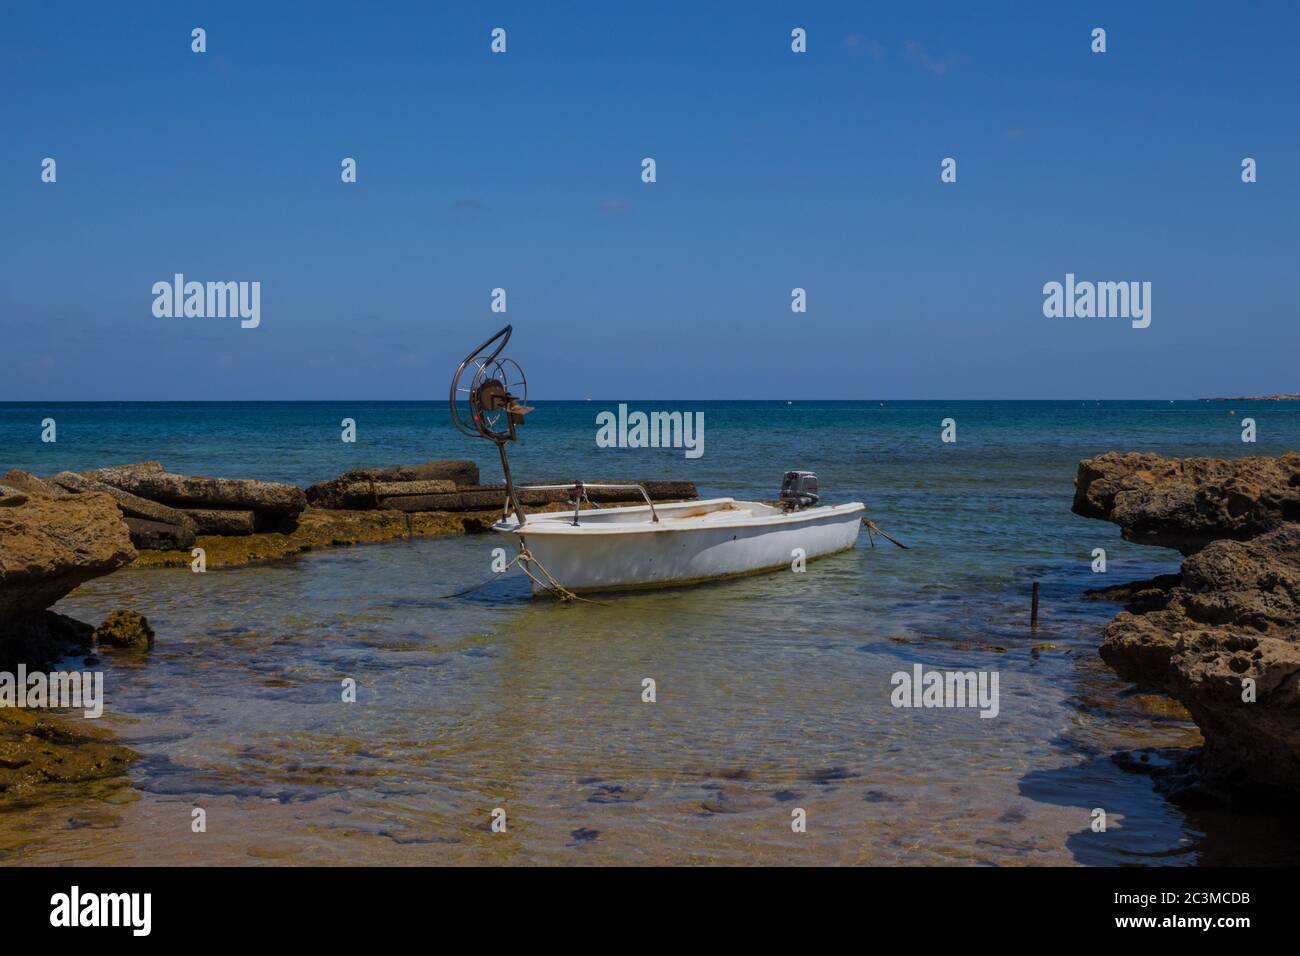 Small sighing boat on the beach of Mediterranean sea near Protaras village in Cyprus Stock Photo